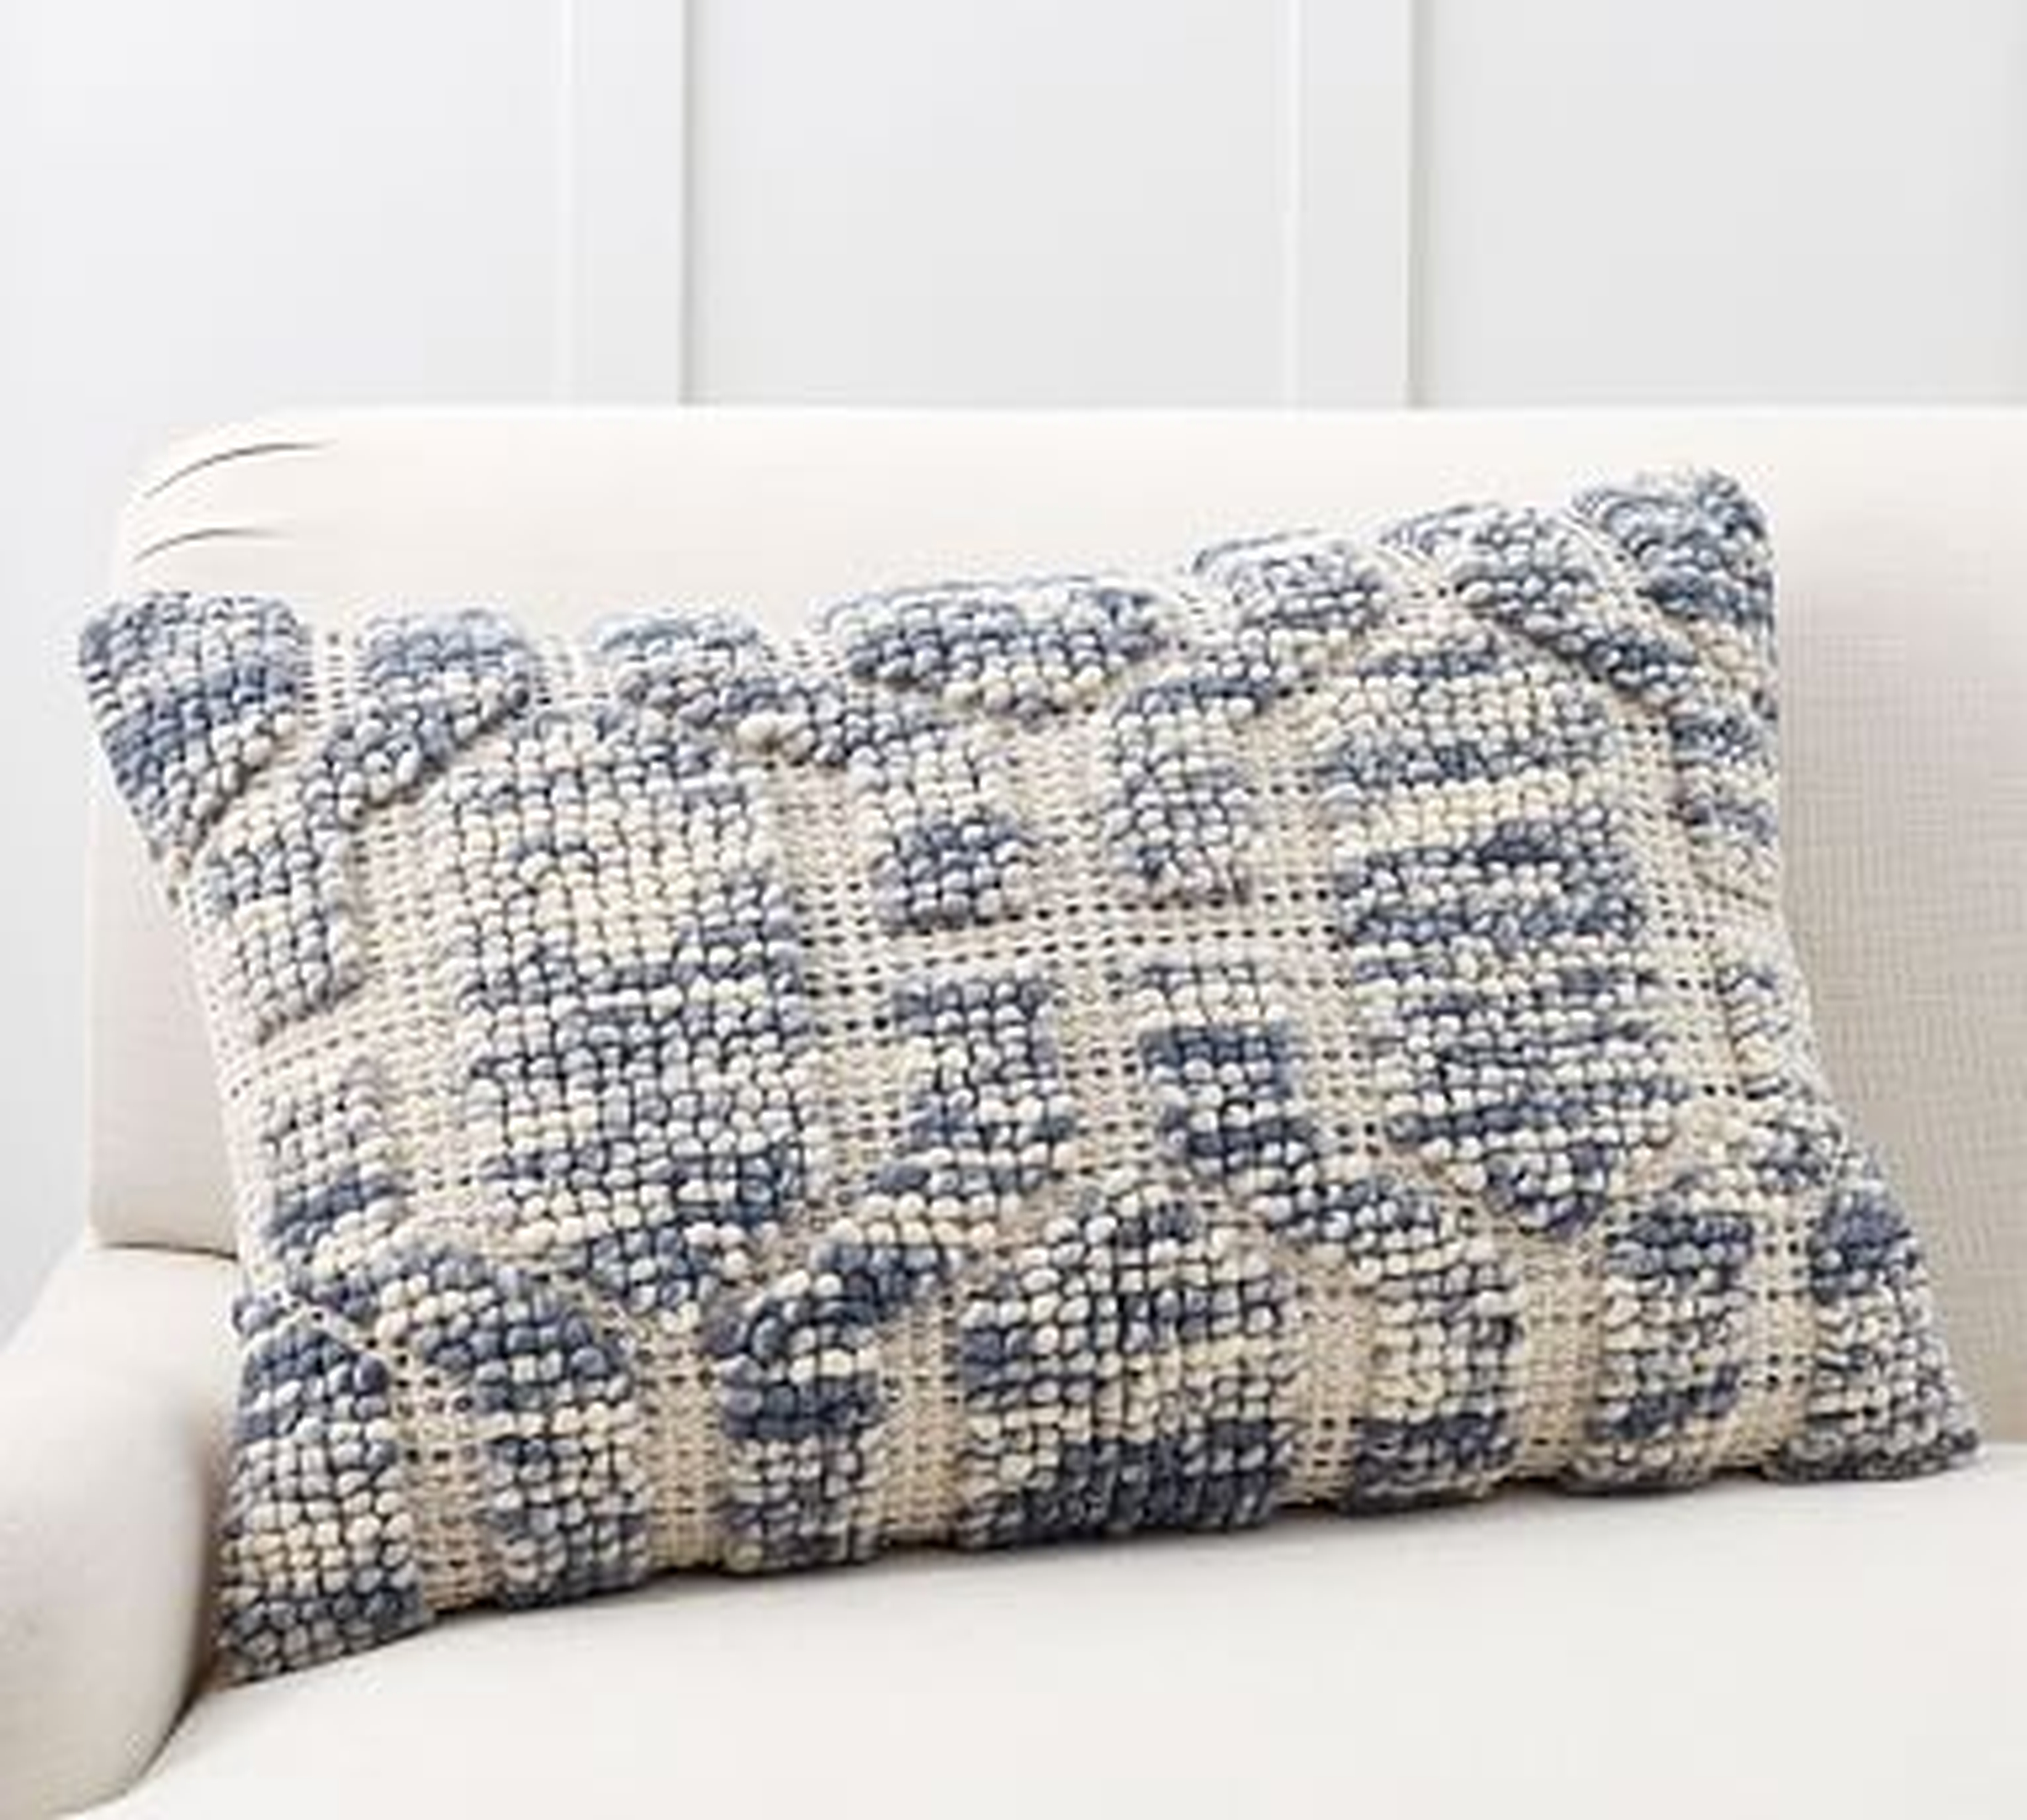 Atlee Tufted Pillow Cover, 20 x 30", Blue Multi - Pottery Barn